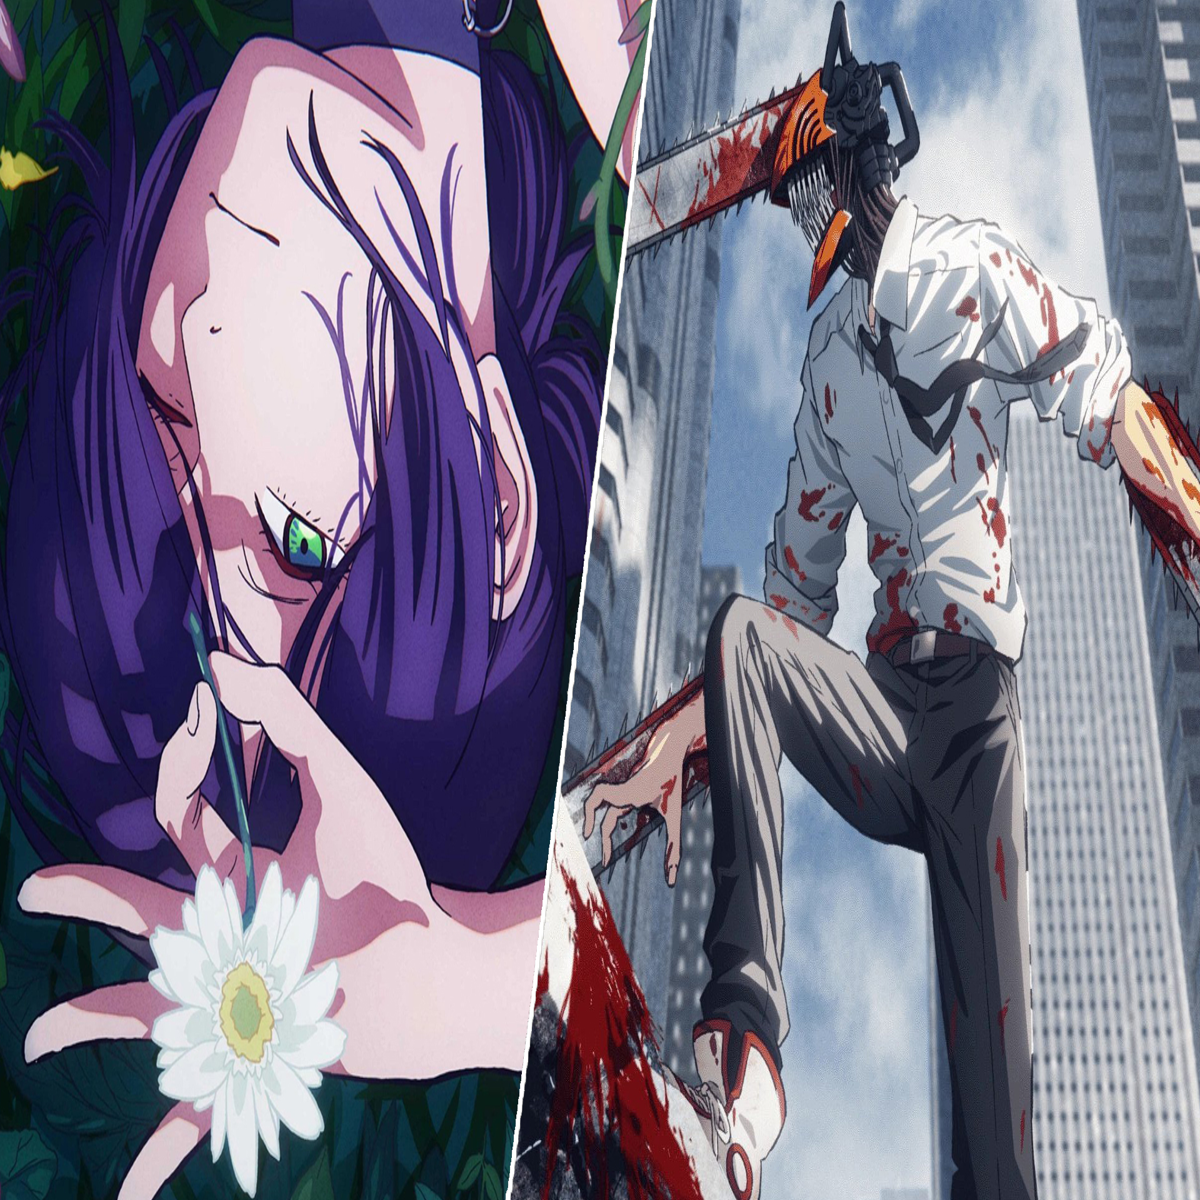 Chainsaw Man' anime release window, cast, trailer, studio, and